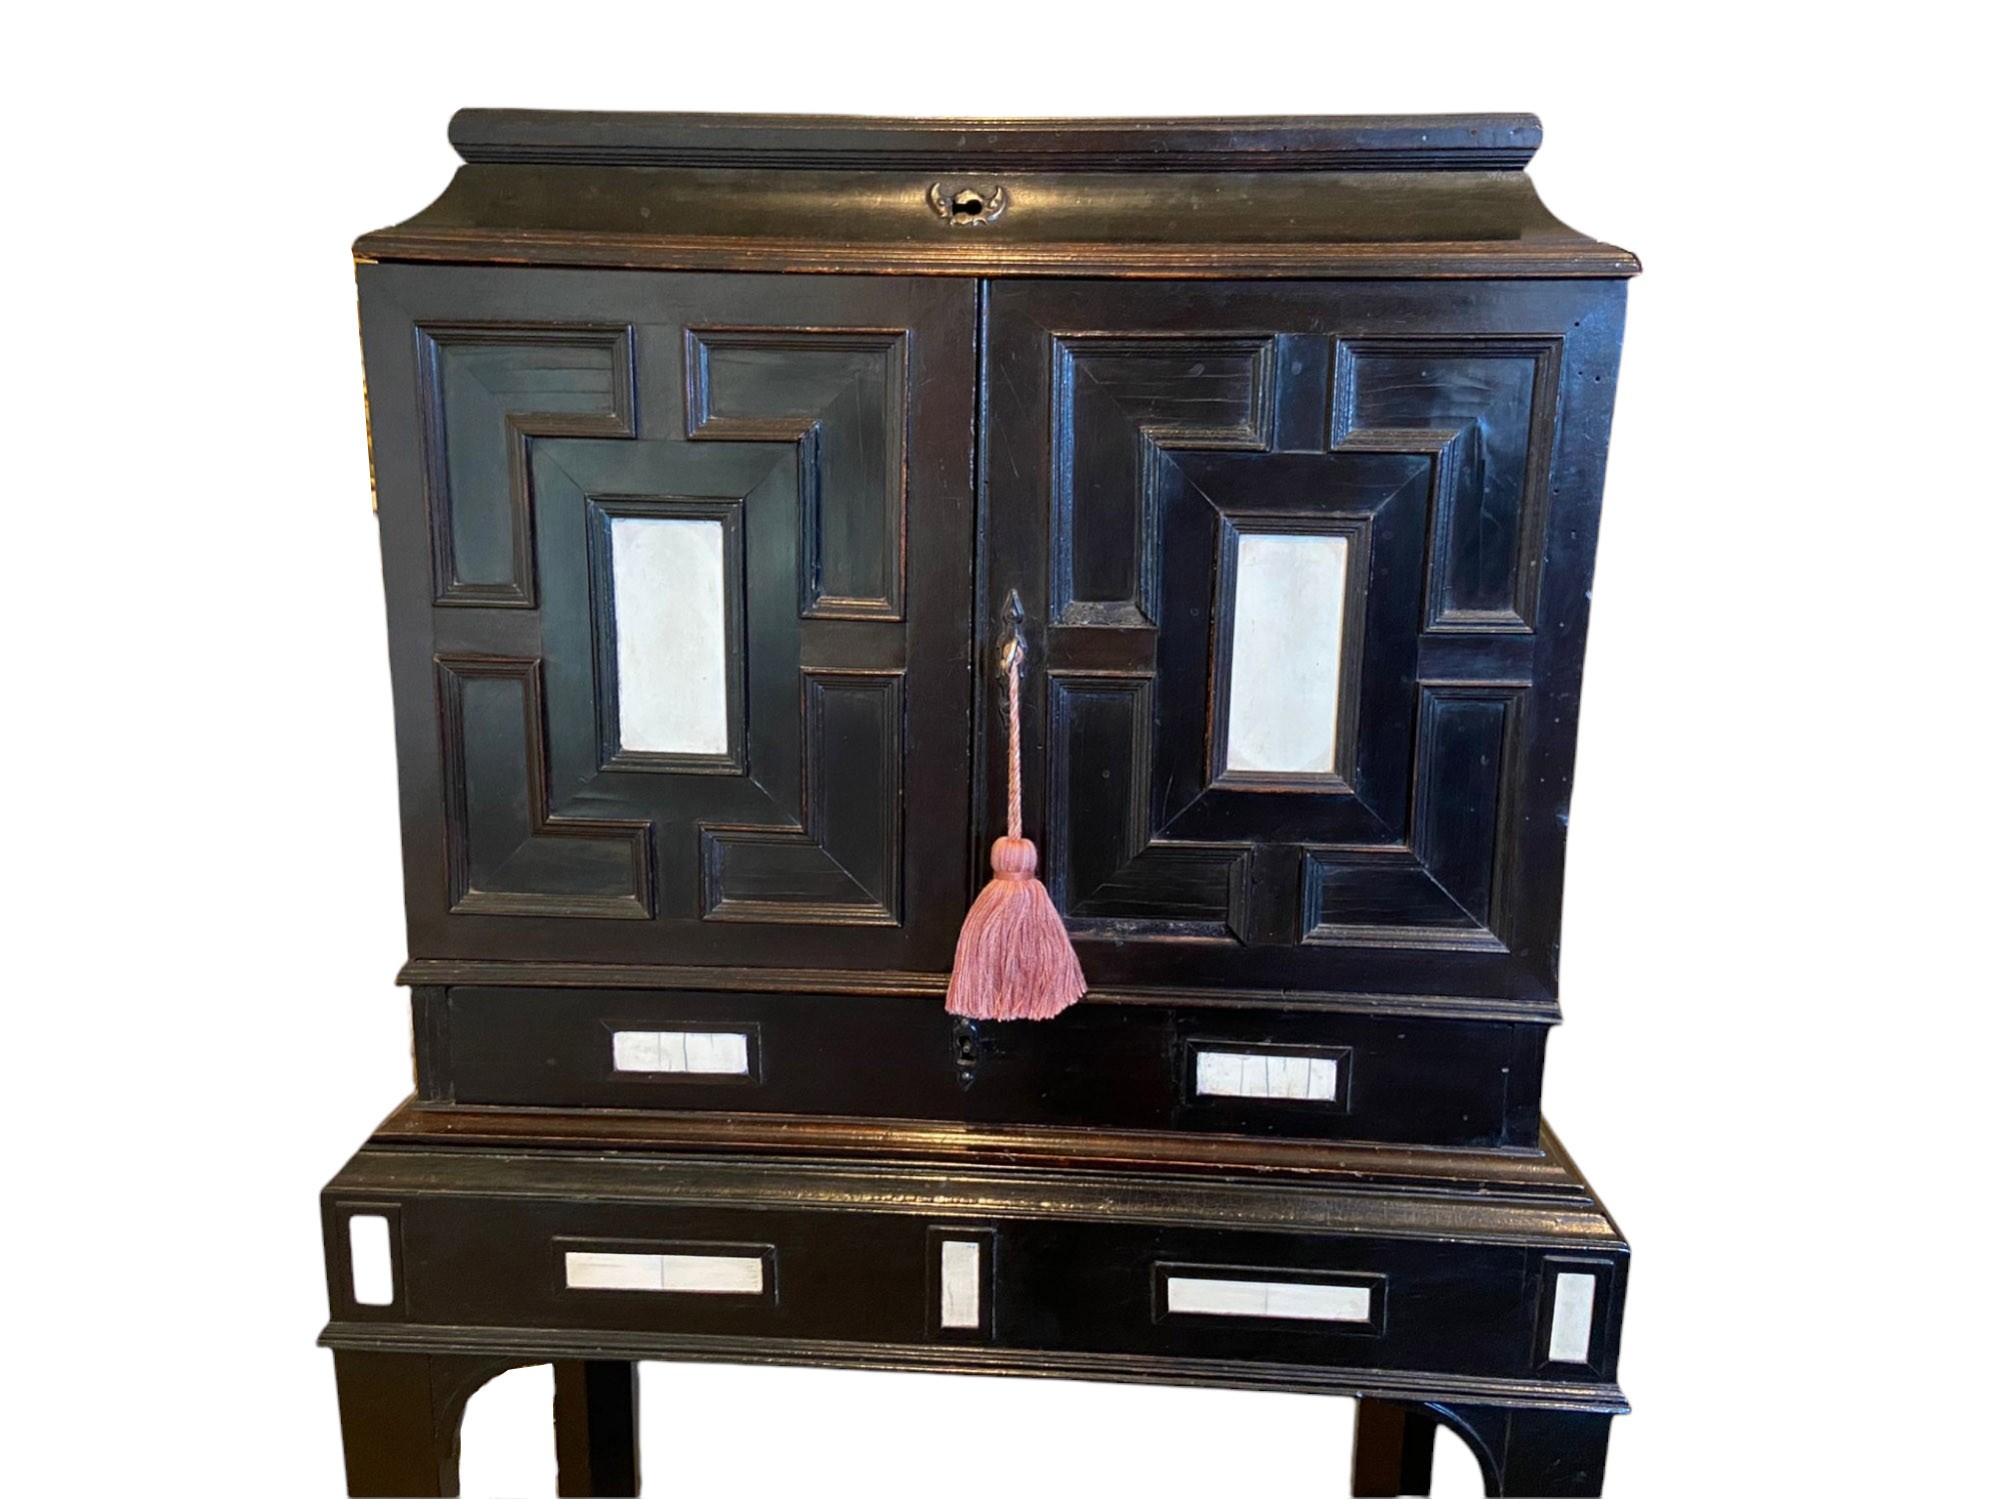 A RARE 17TH CENTURY EBONY IVORY AND EMBROIDERED RAISED WORK ANTWERP CABINET ON STAND The rise and - Image 5 of 12